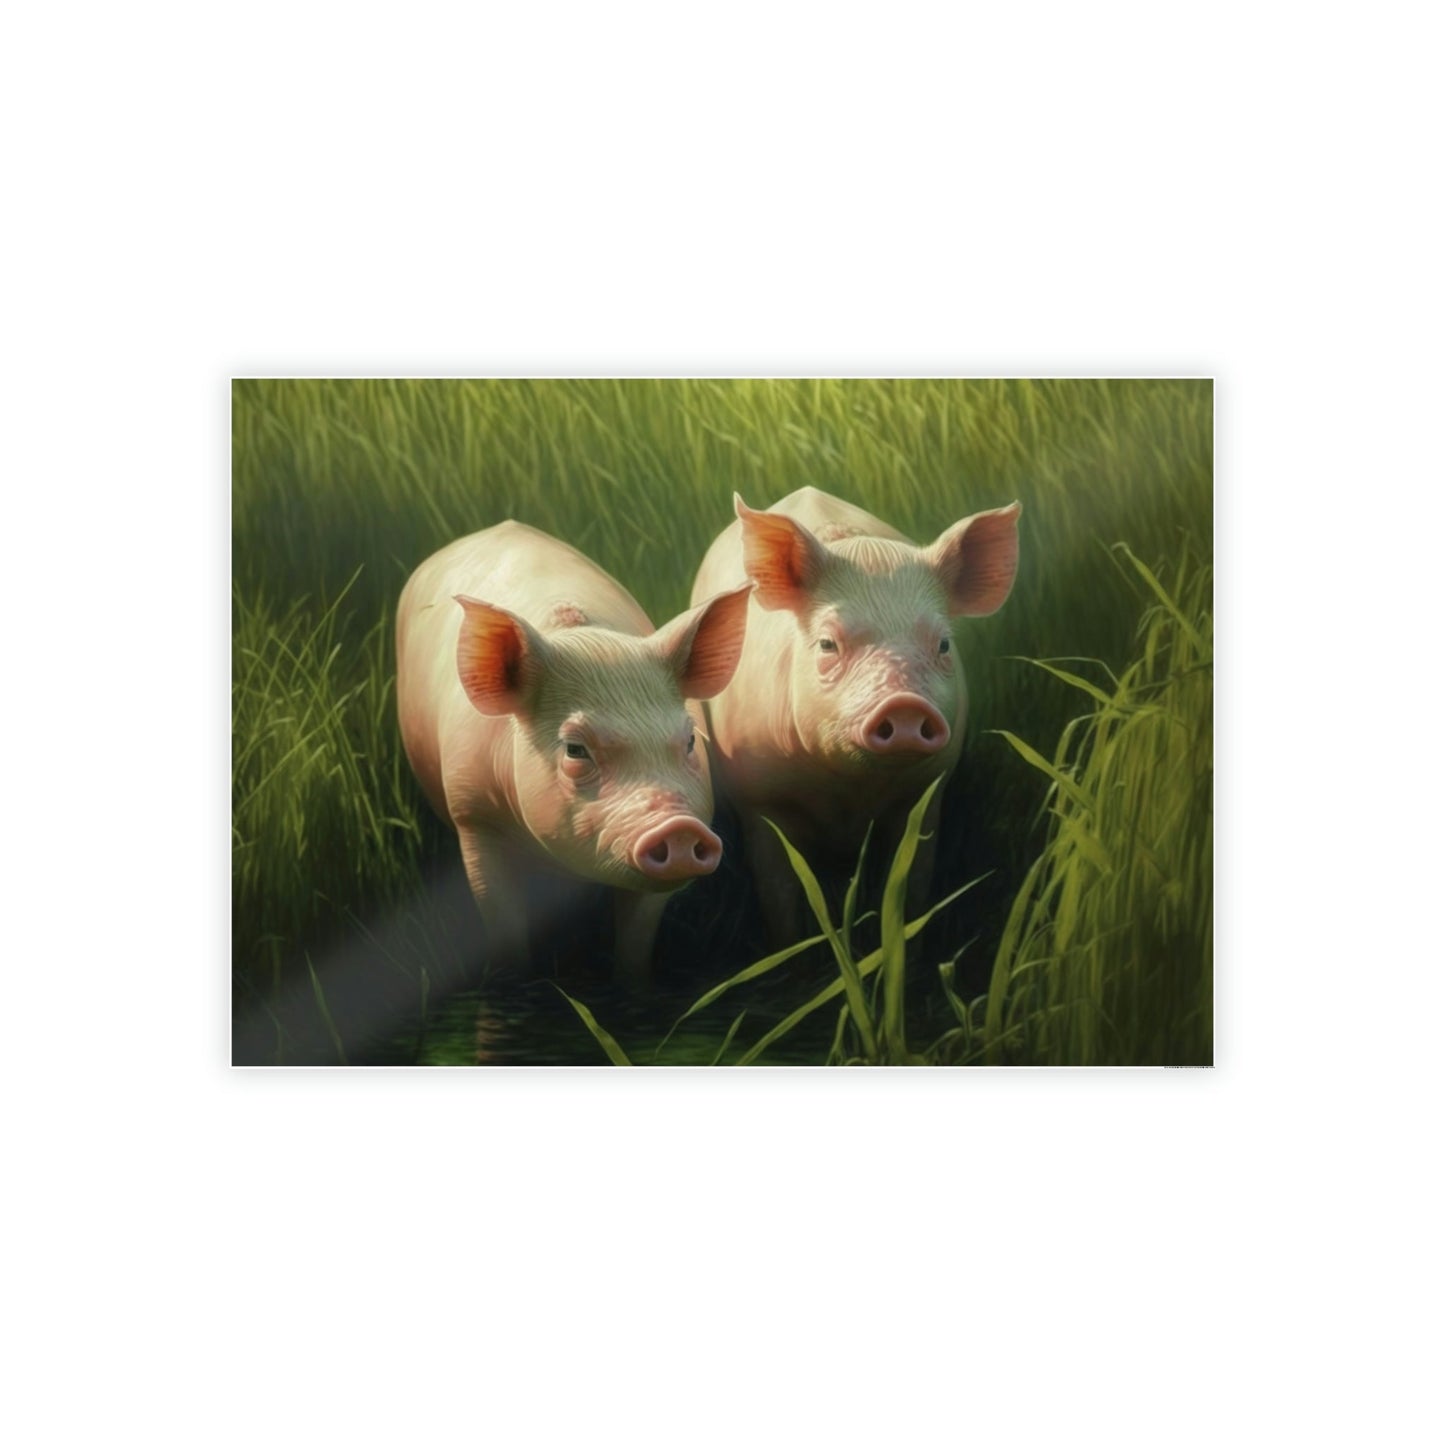 From Mud to Magic: A Joyful Gathering of Playful Pigs in the Meadow